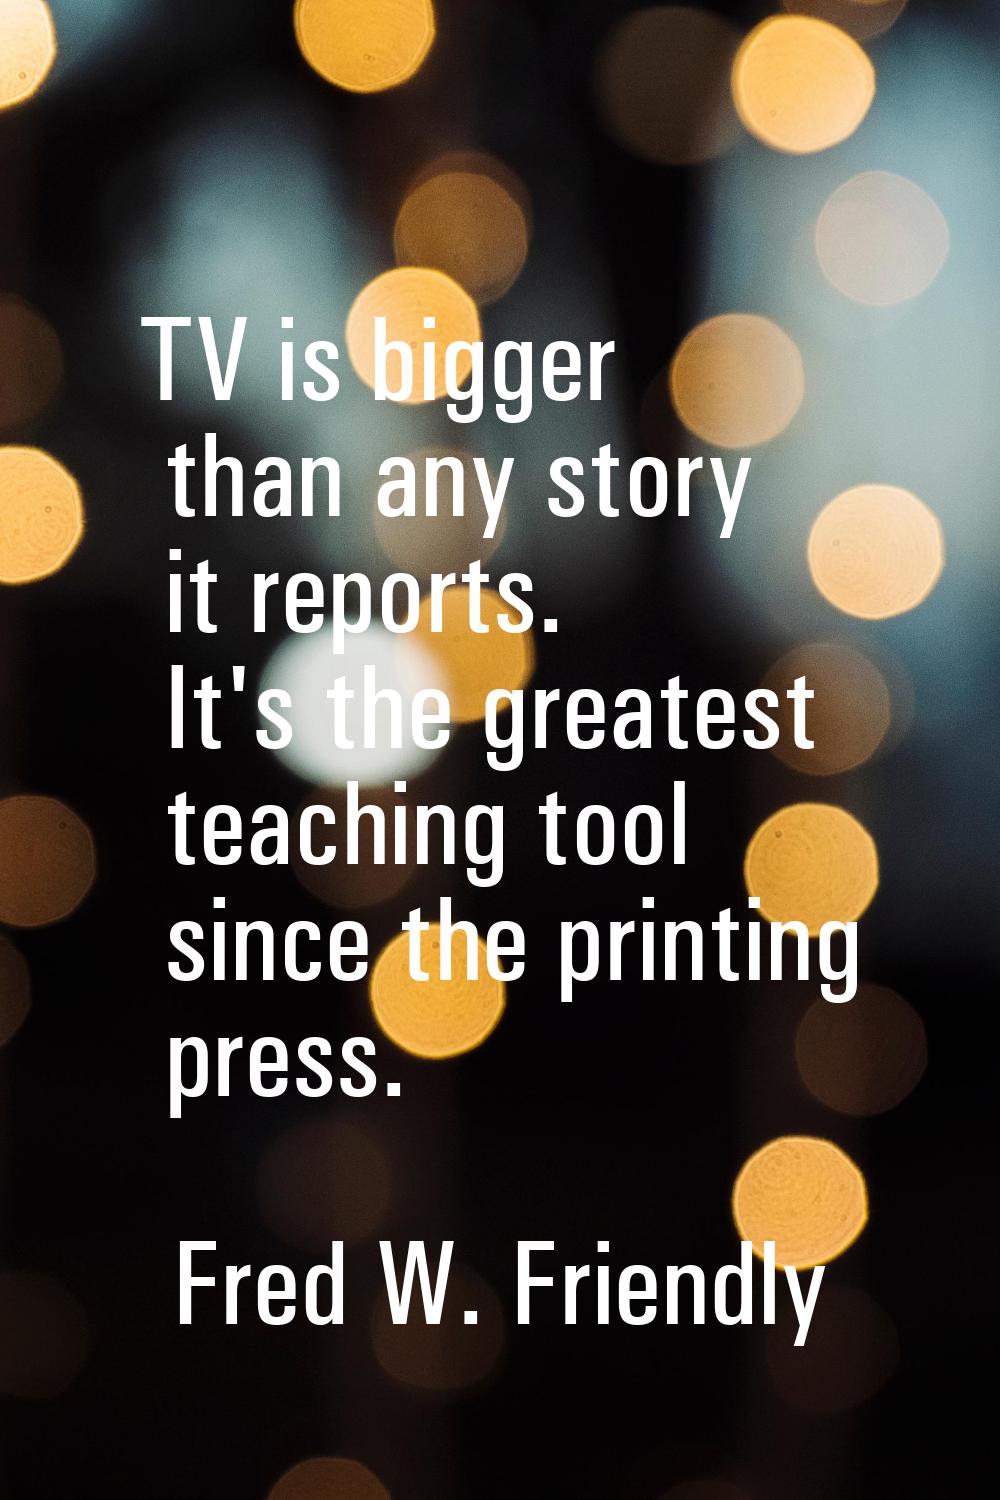 TV is bigger than any story it reports. It's the greatest teaching tool since the printing press.